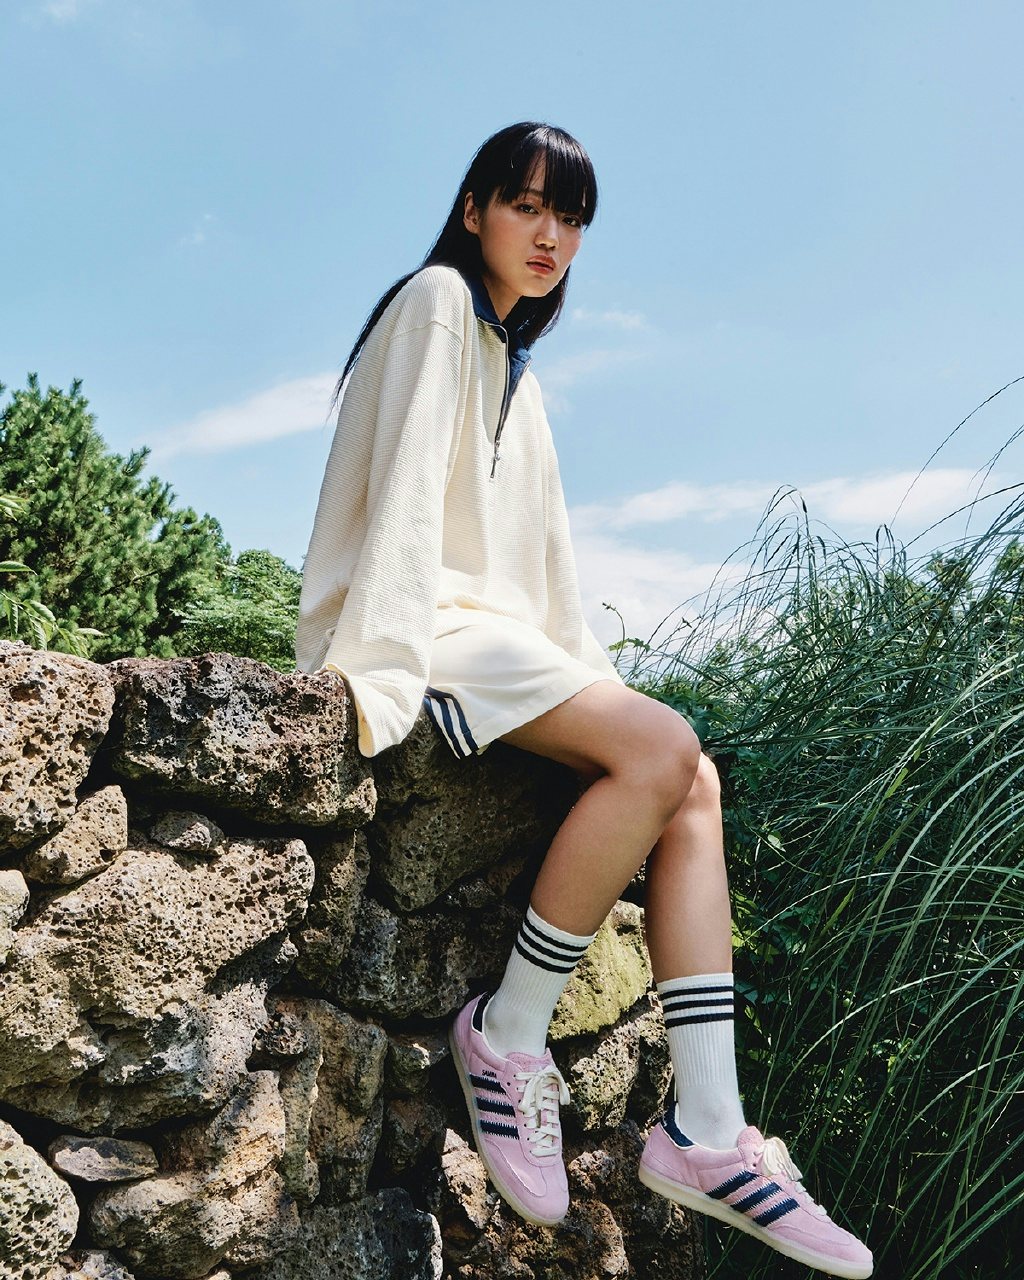 Teaming together for a second time, NoTitle and Adidas Originals have desgined four immaculate takes on the Samba sneaker, along with a clothing capsule. Photo: NoTitle x Adidas Originals